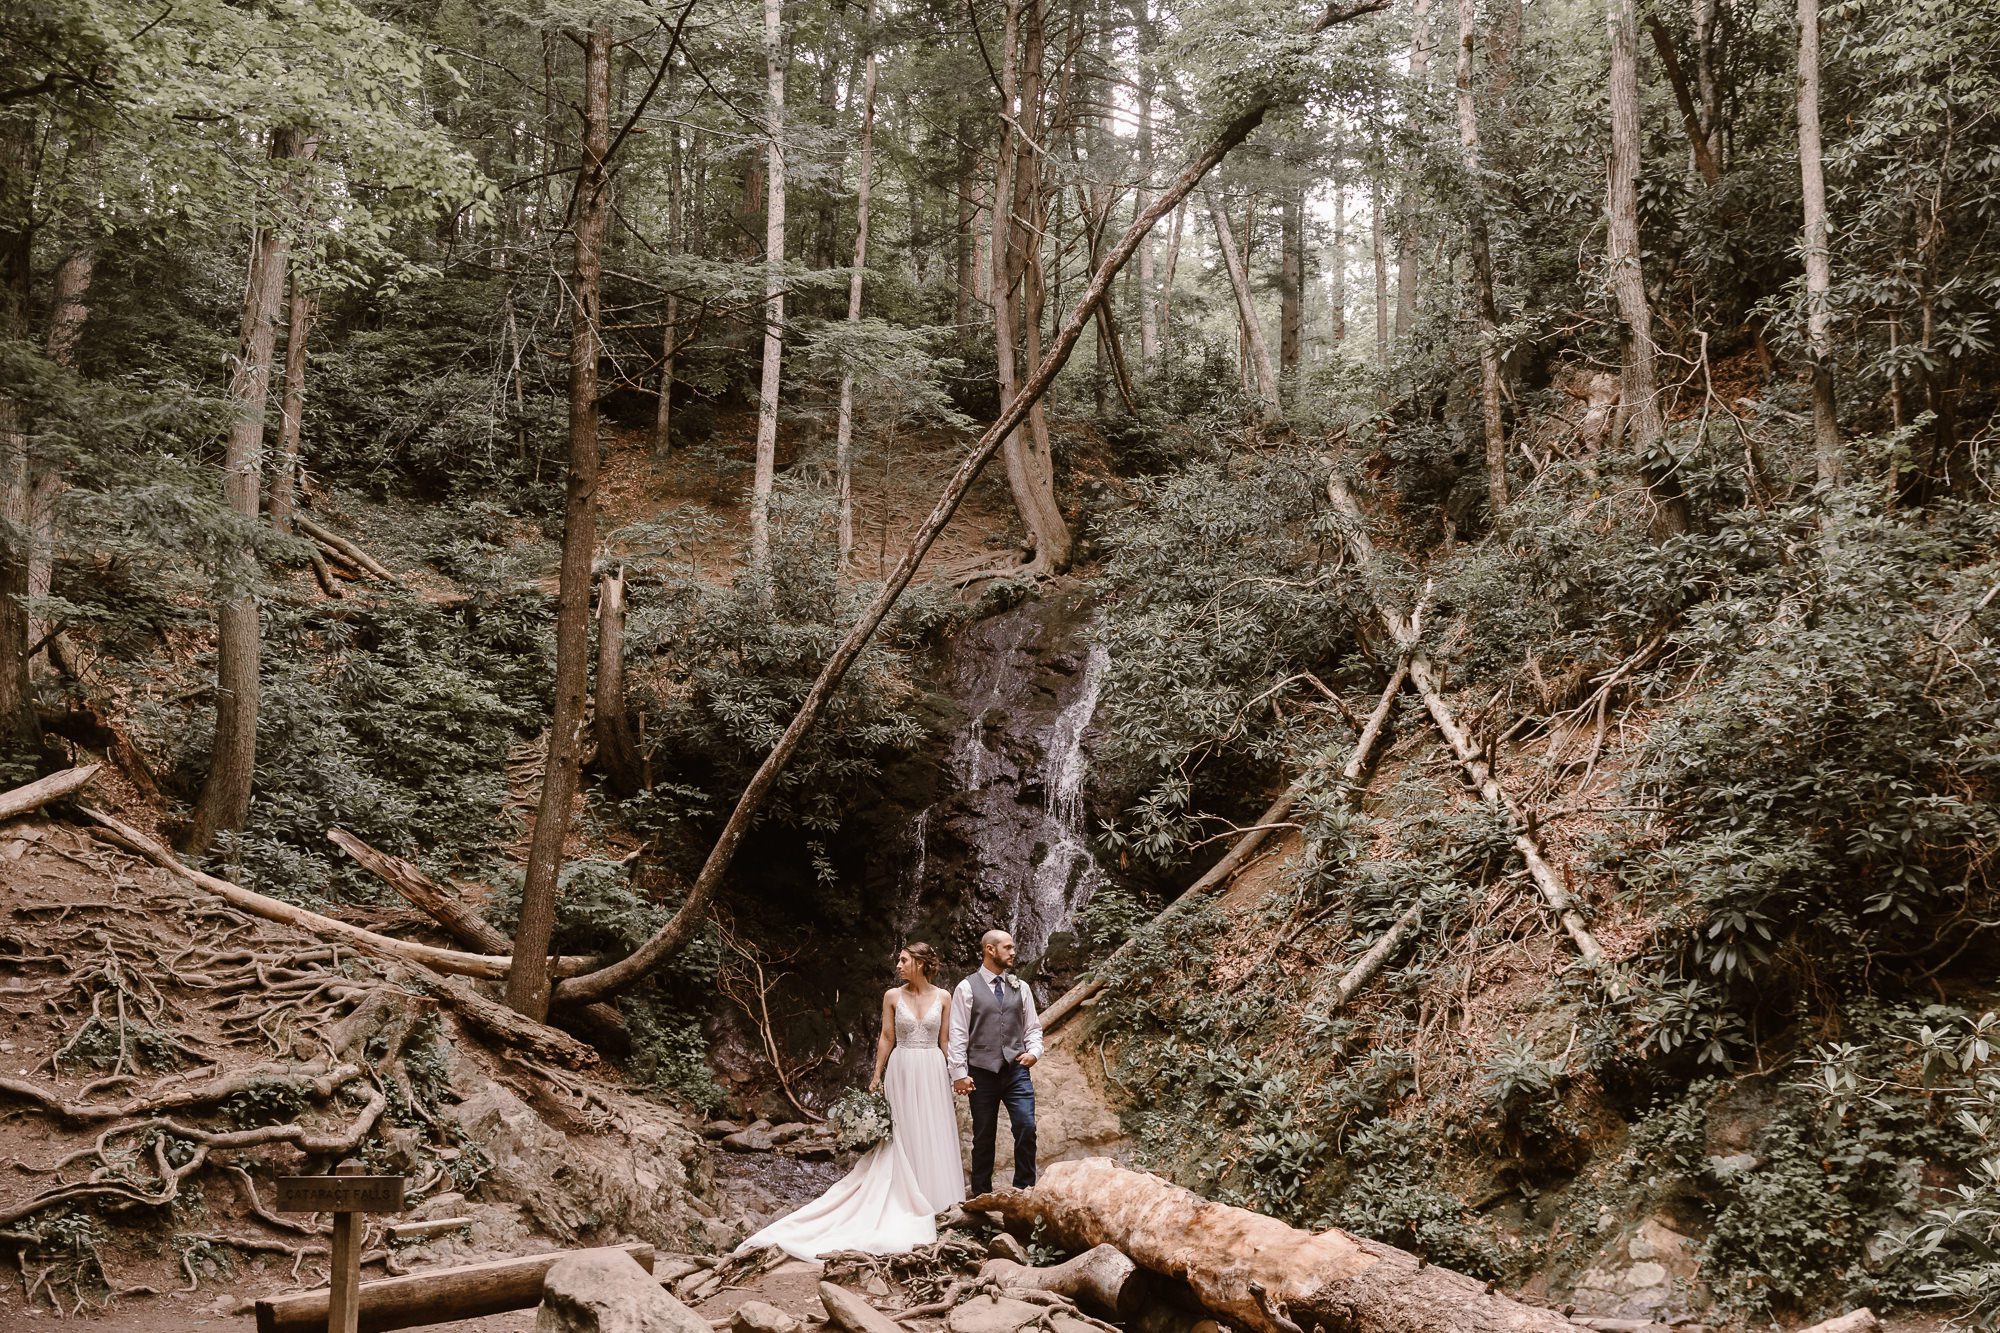 Wedding versus Elopement - What's The Difference